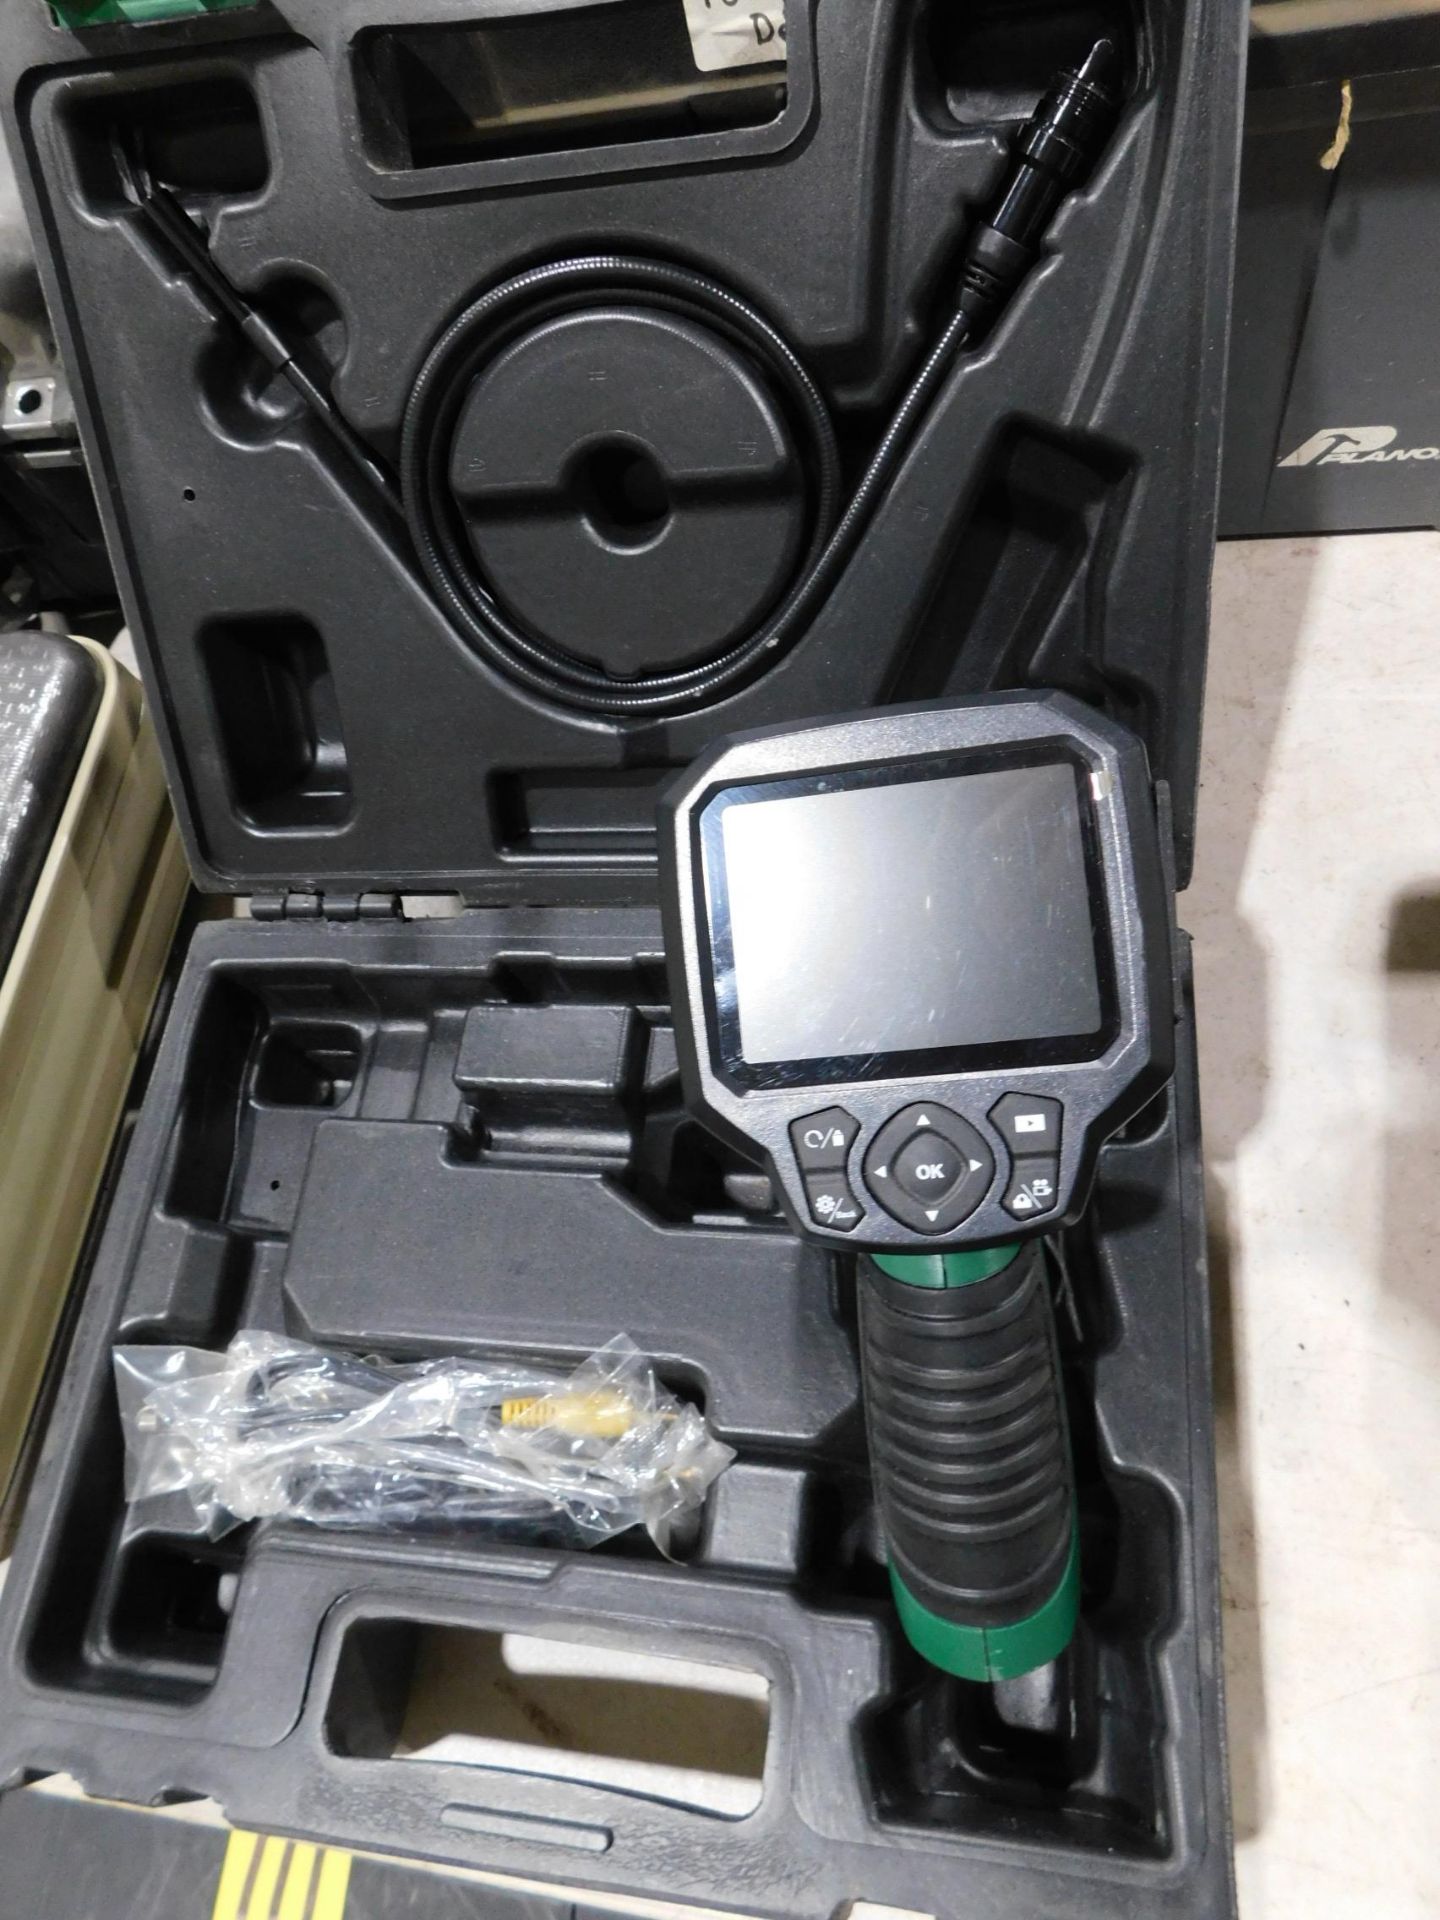 Masterforce Digital Inspection Camera with 3.5" Screen